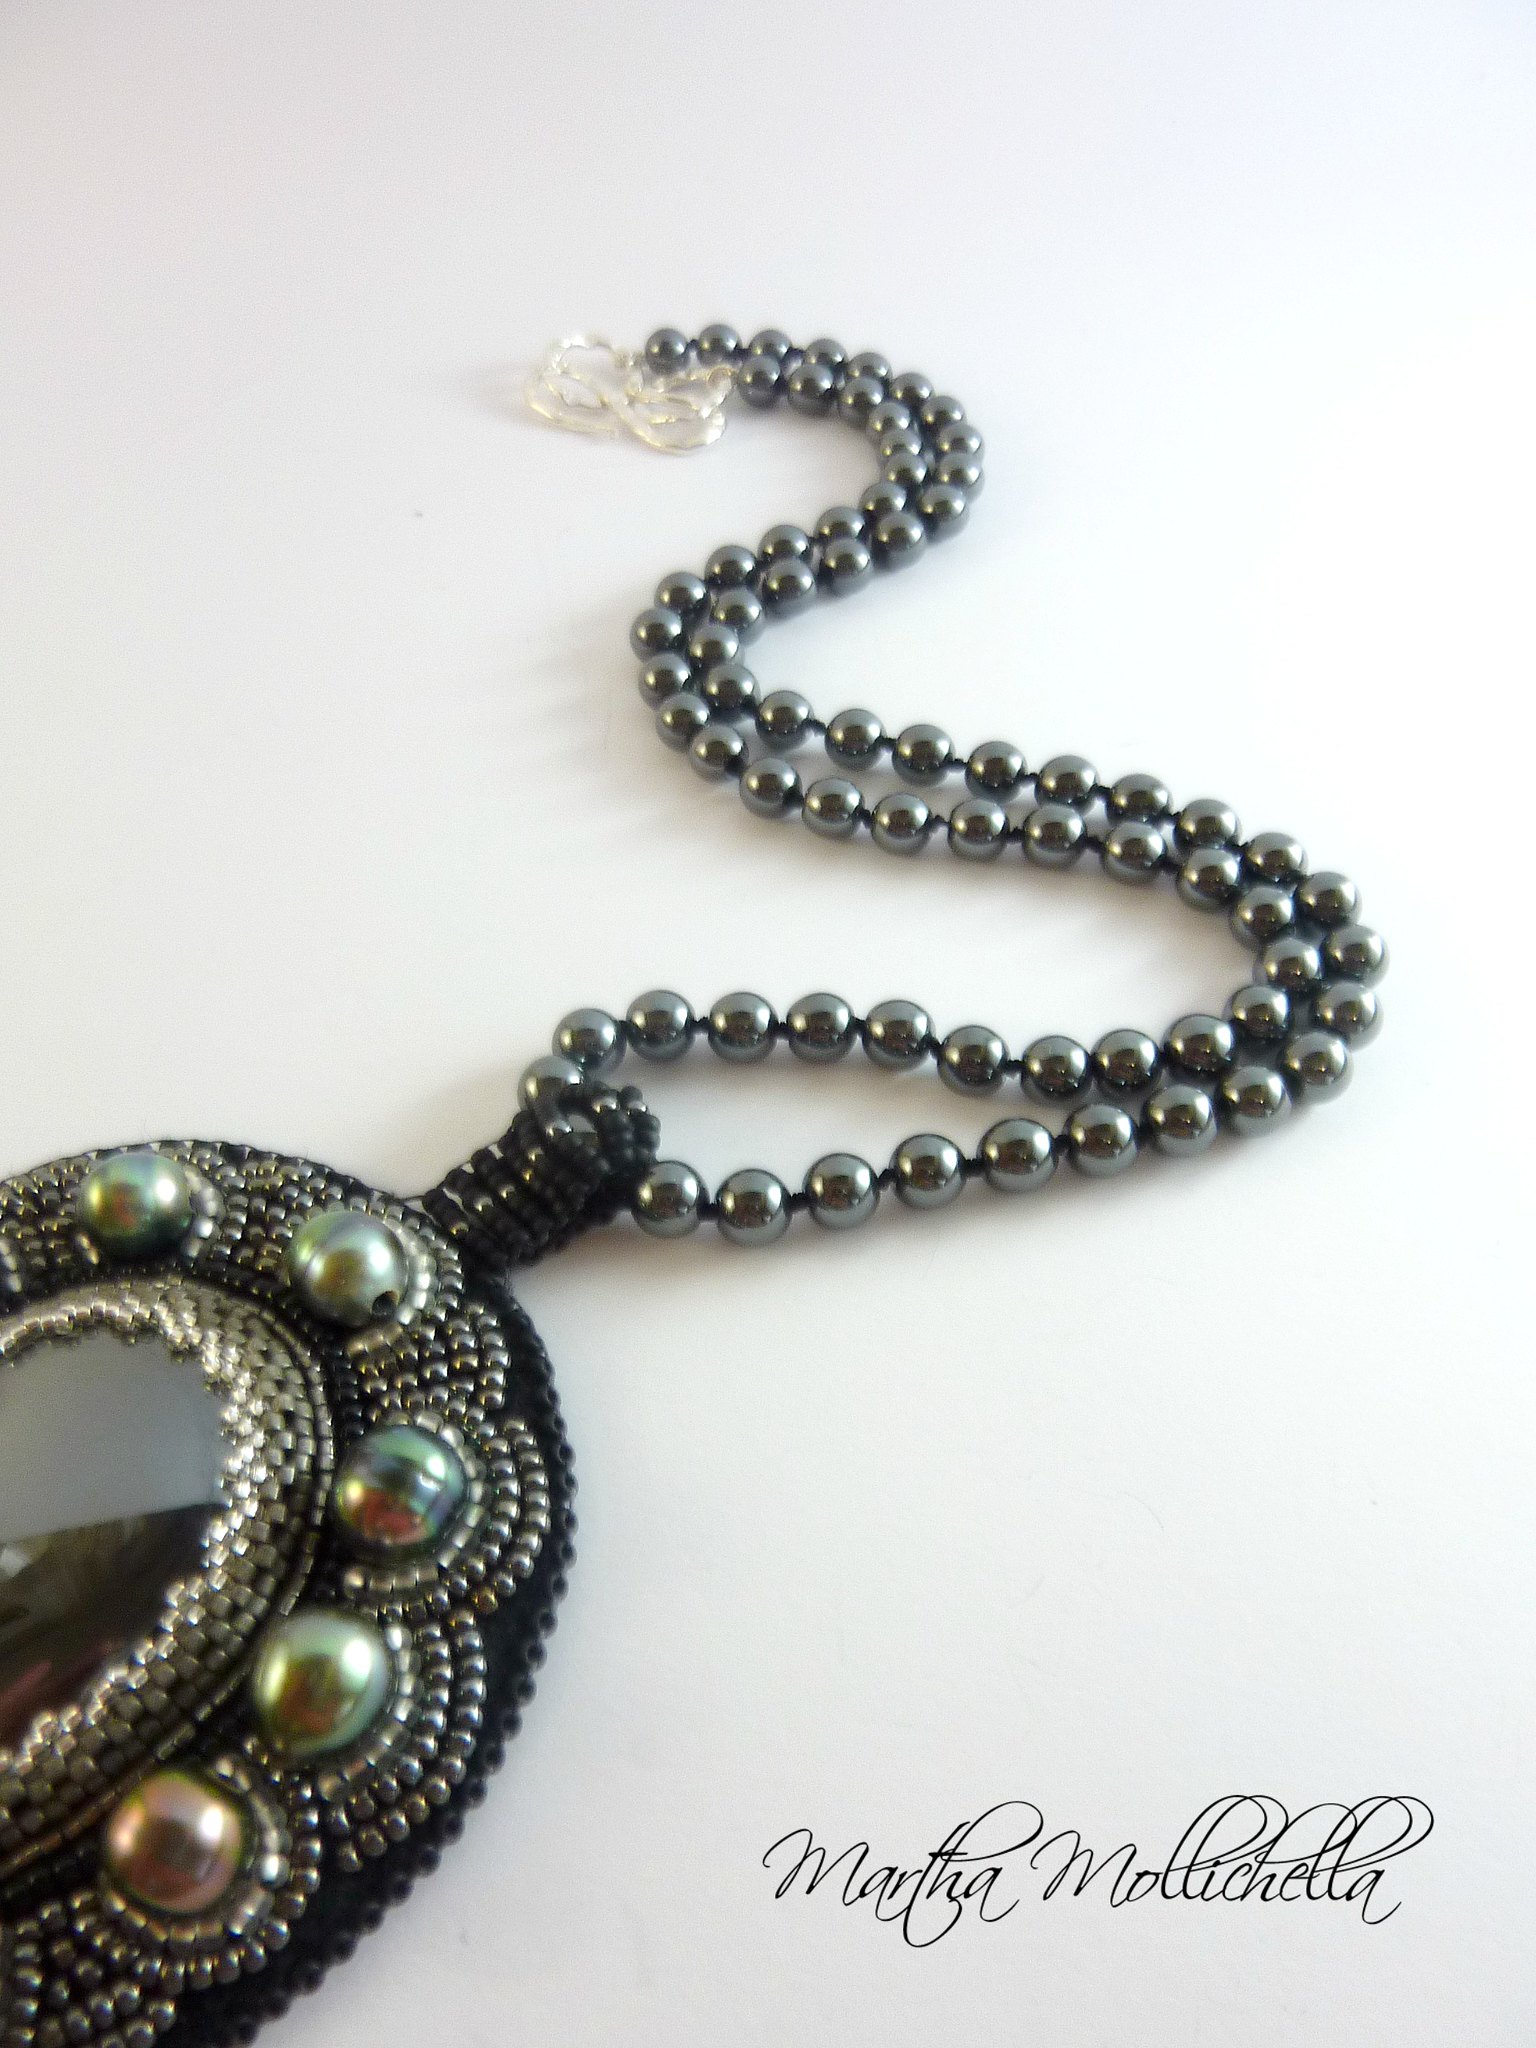 Polynesian pearls handmade with black pearls, beads, hematite pearls, sterling silver 925 handmade in Italy